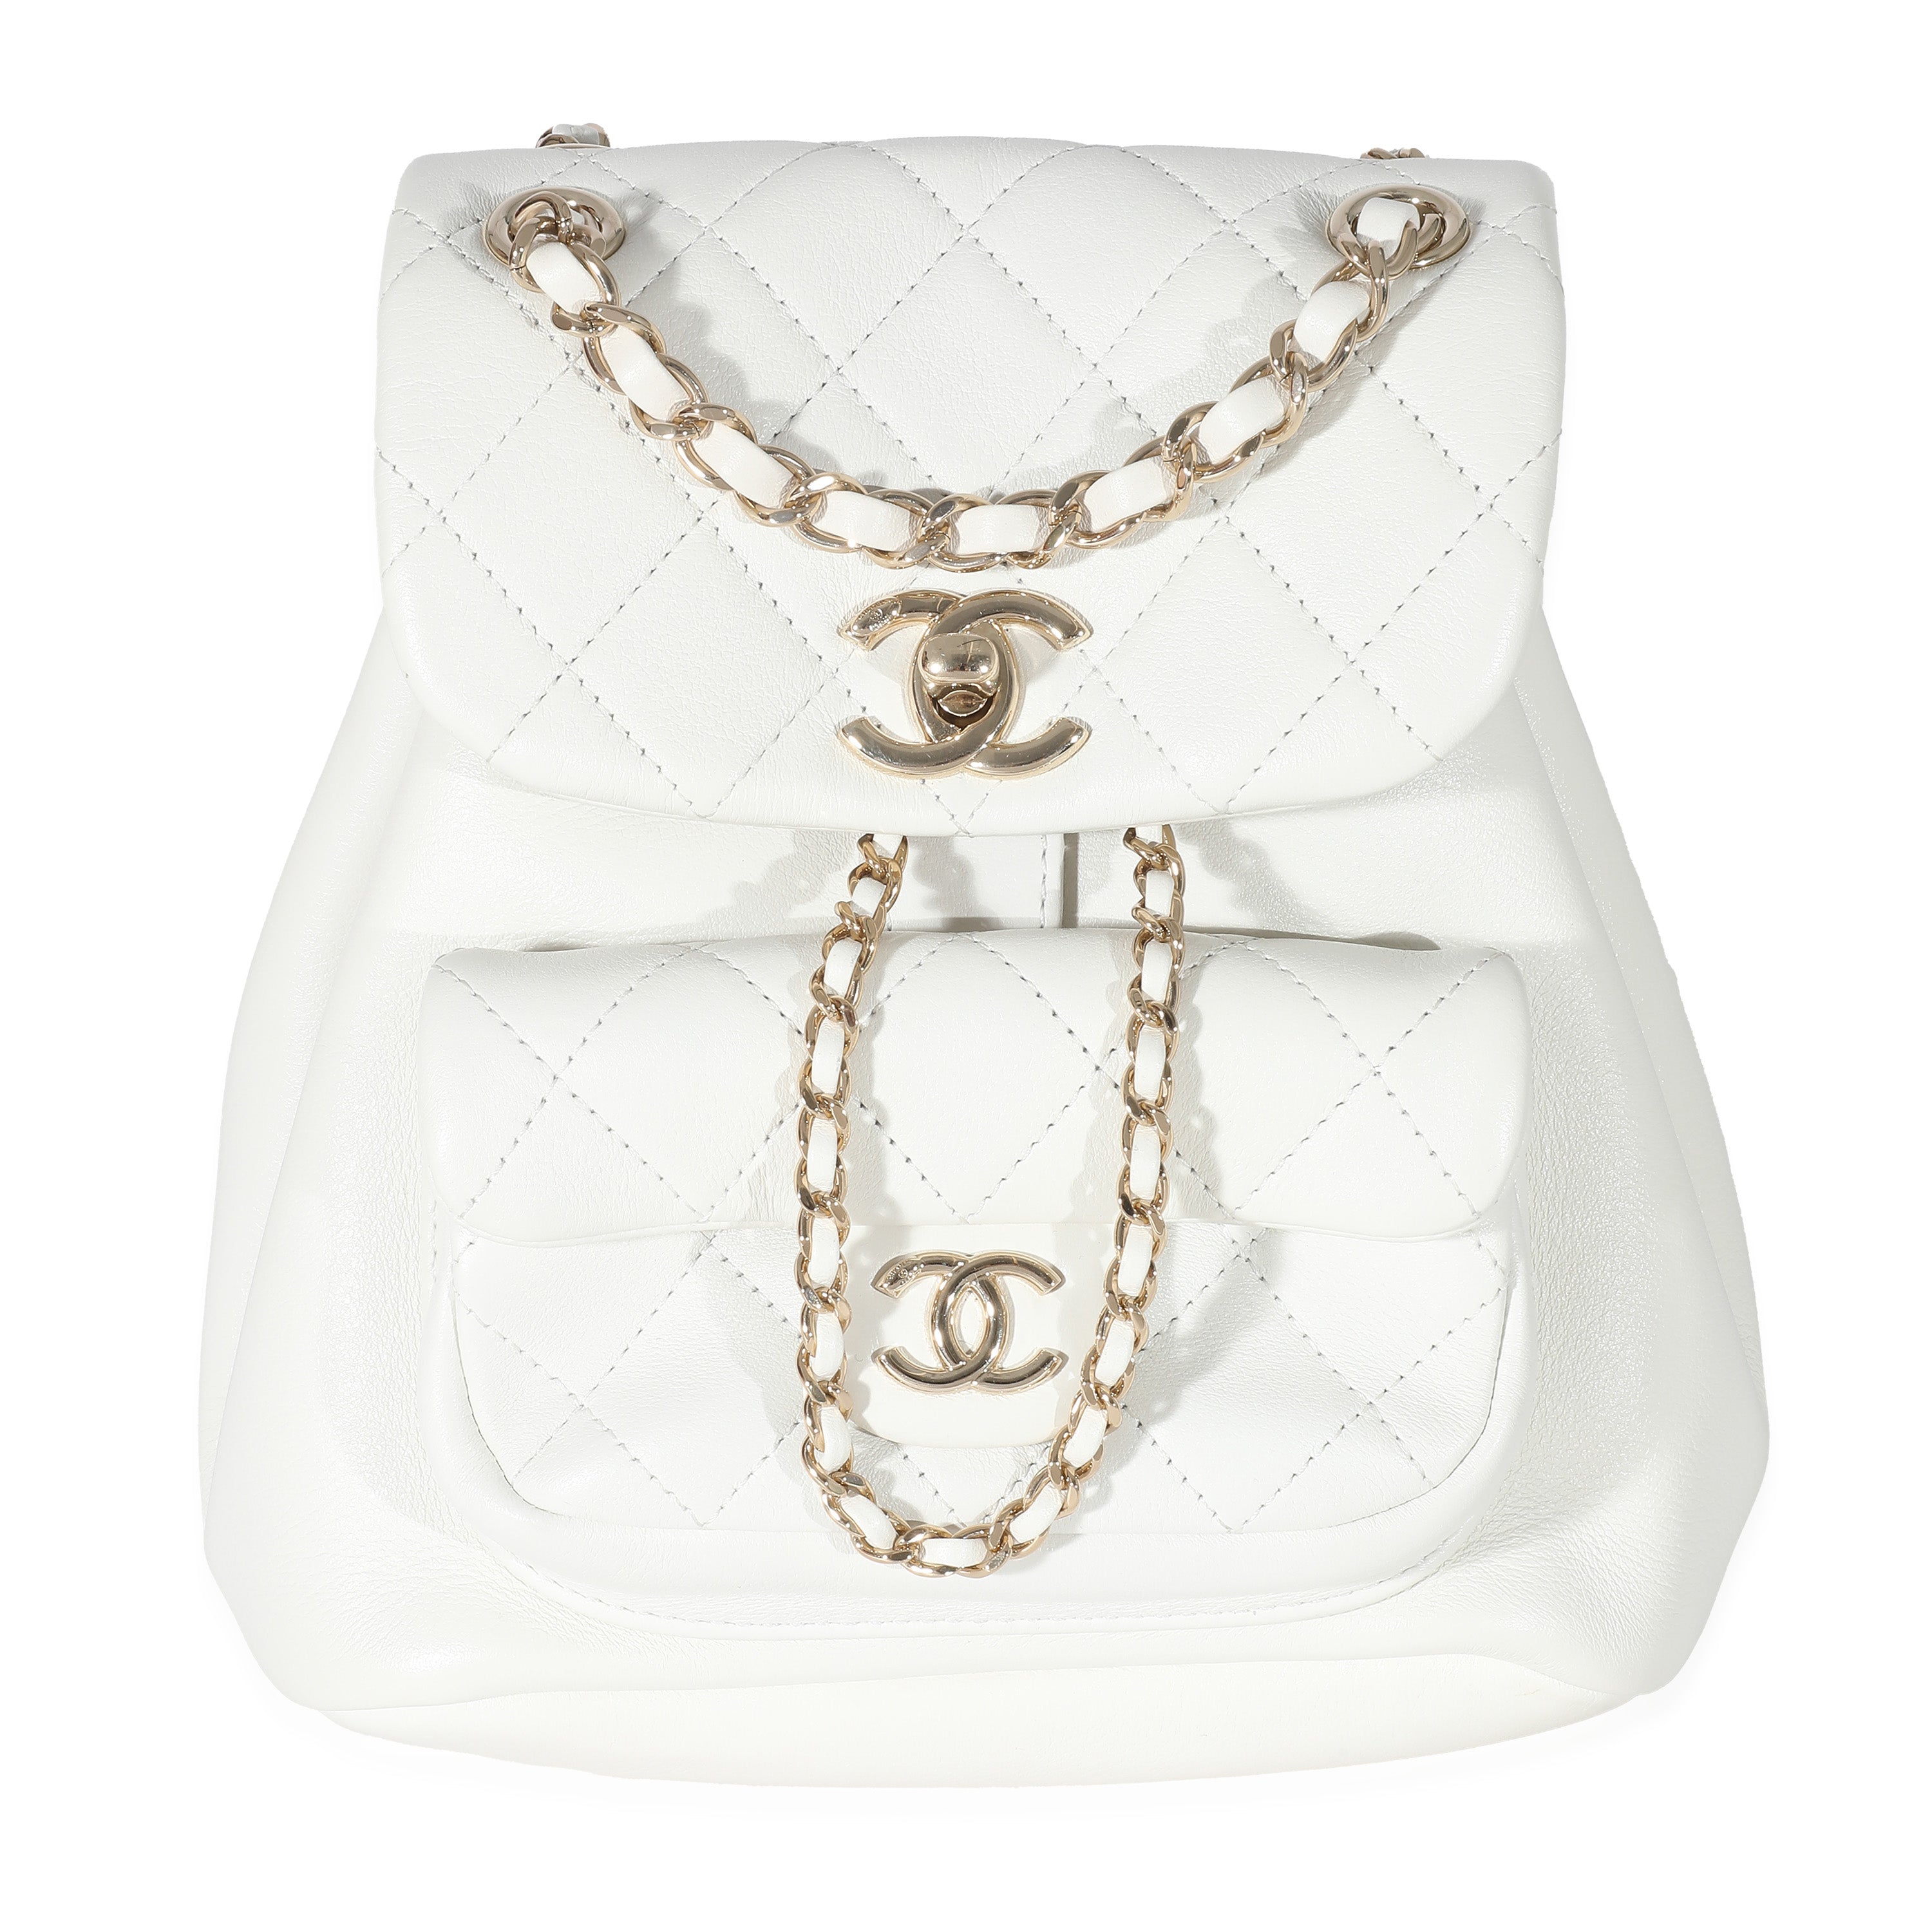 Chanel Metallic Gold Quilted Lambskin Drawstring Backpack Pale